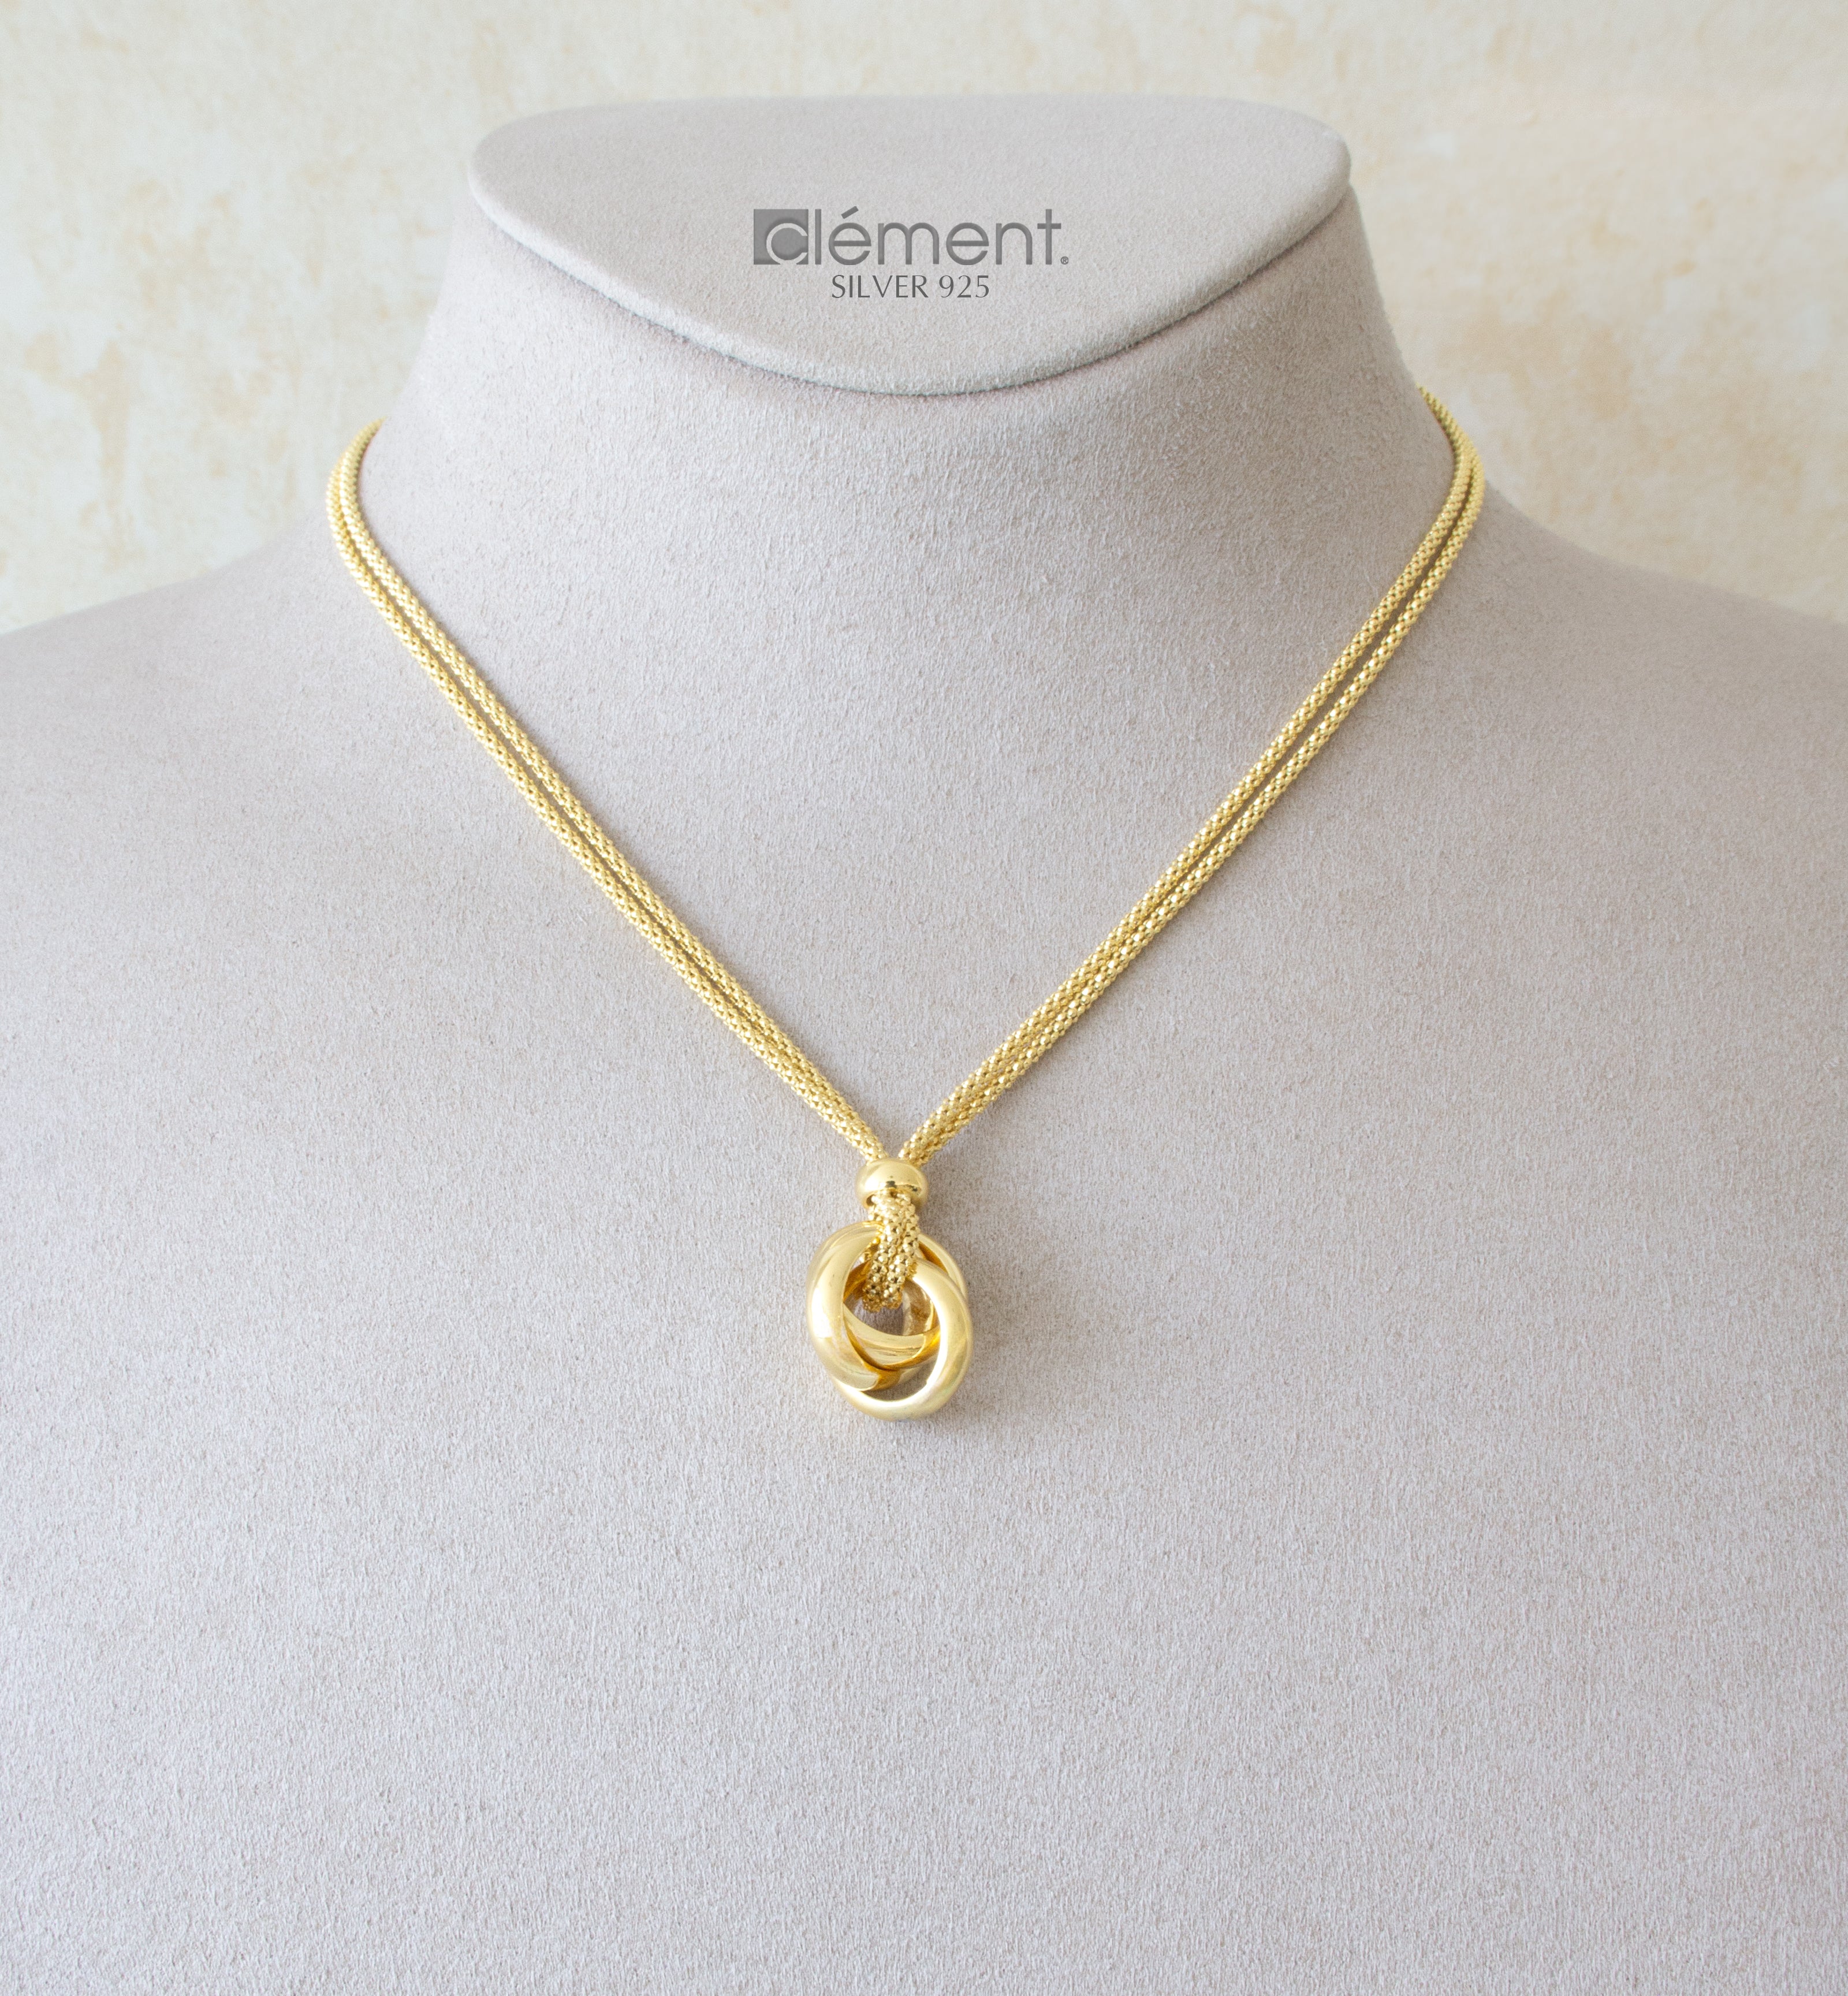 Silver 925 Yellow Gold Plated Knot Necklace